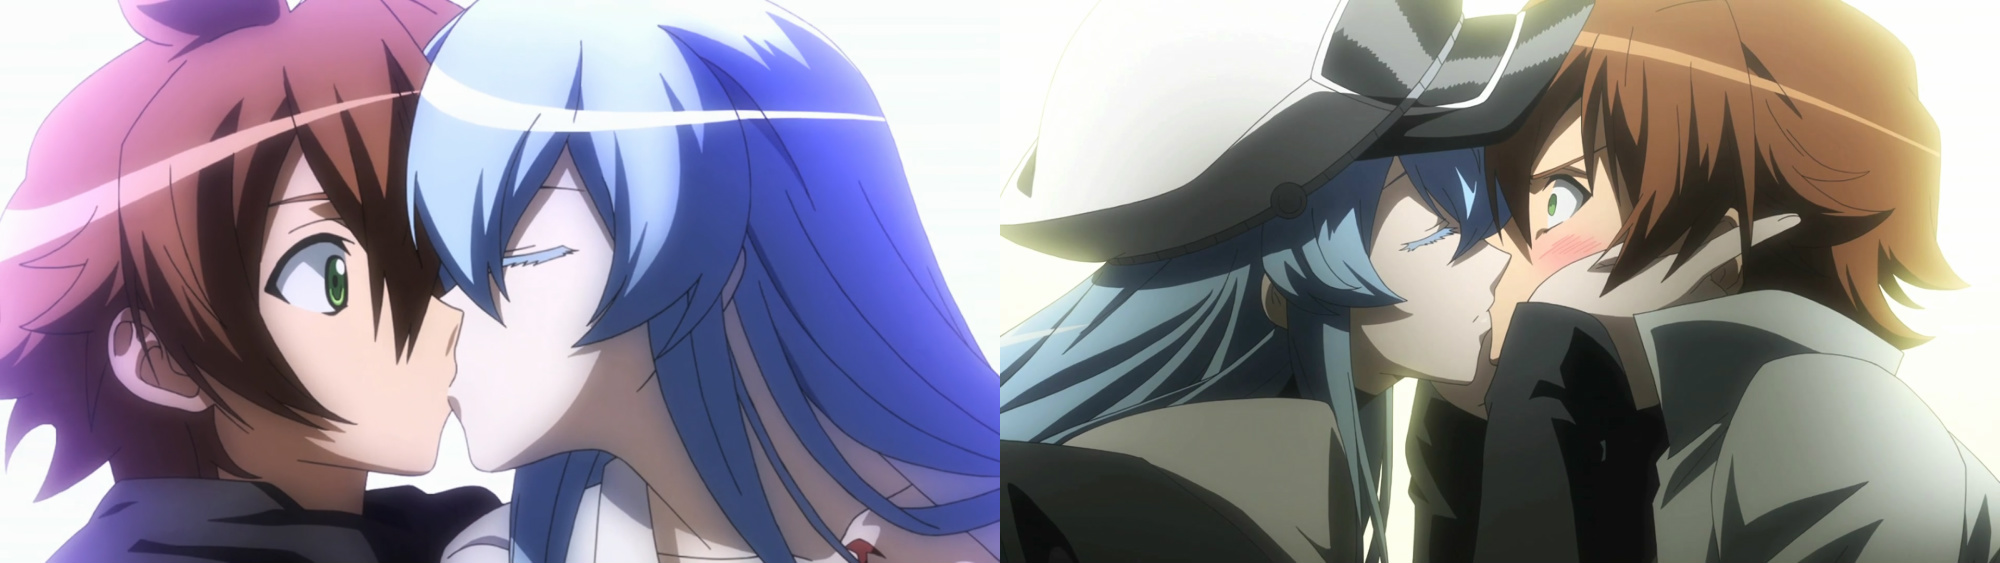 Tatsumi and Esdeath Kisses by weissdrum on DeviantArt